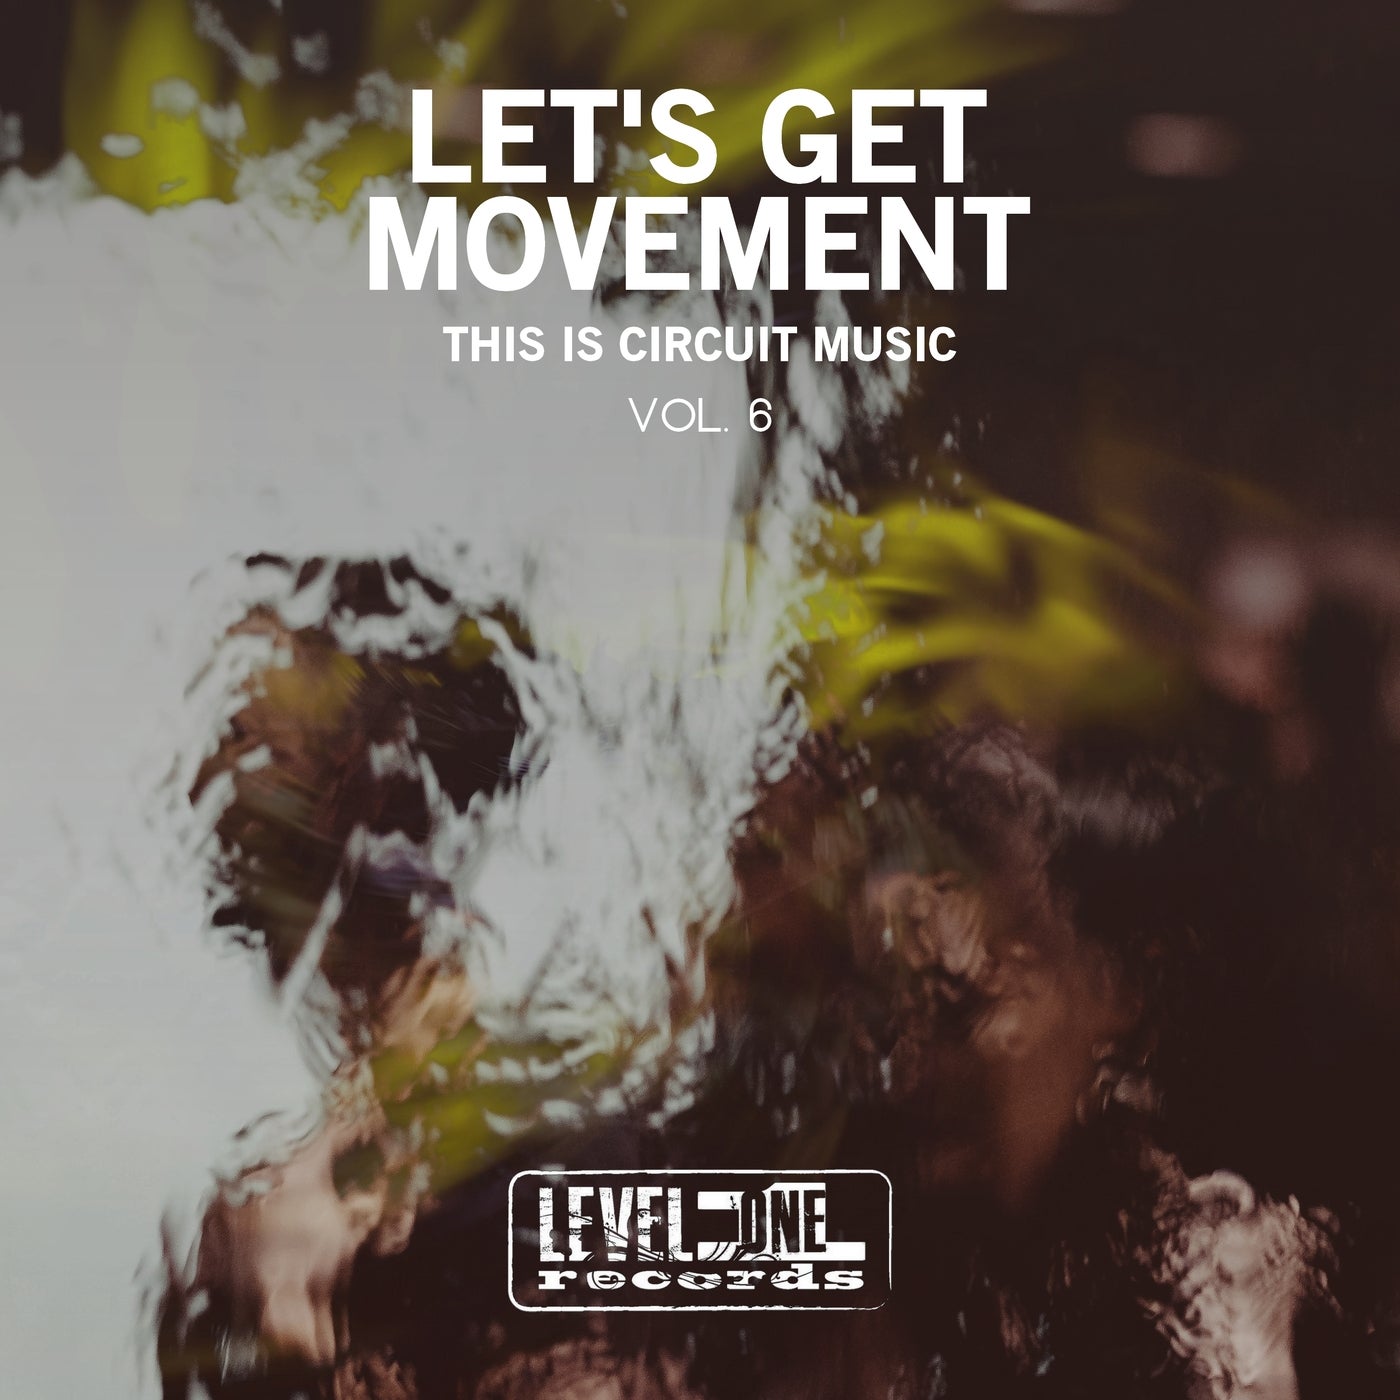 Let's Get Movement, Vol. 6 (This Is Circuit Music)